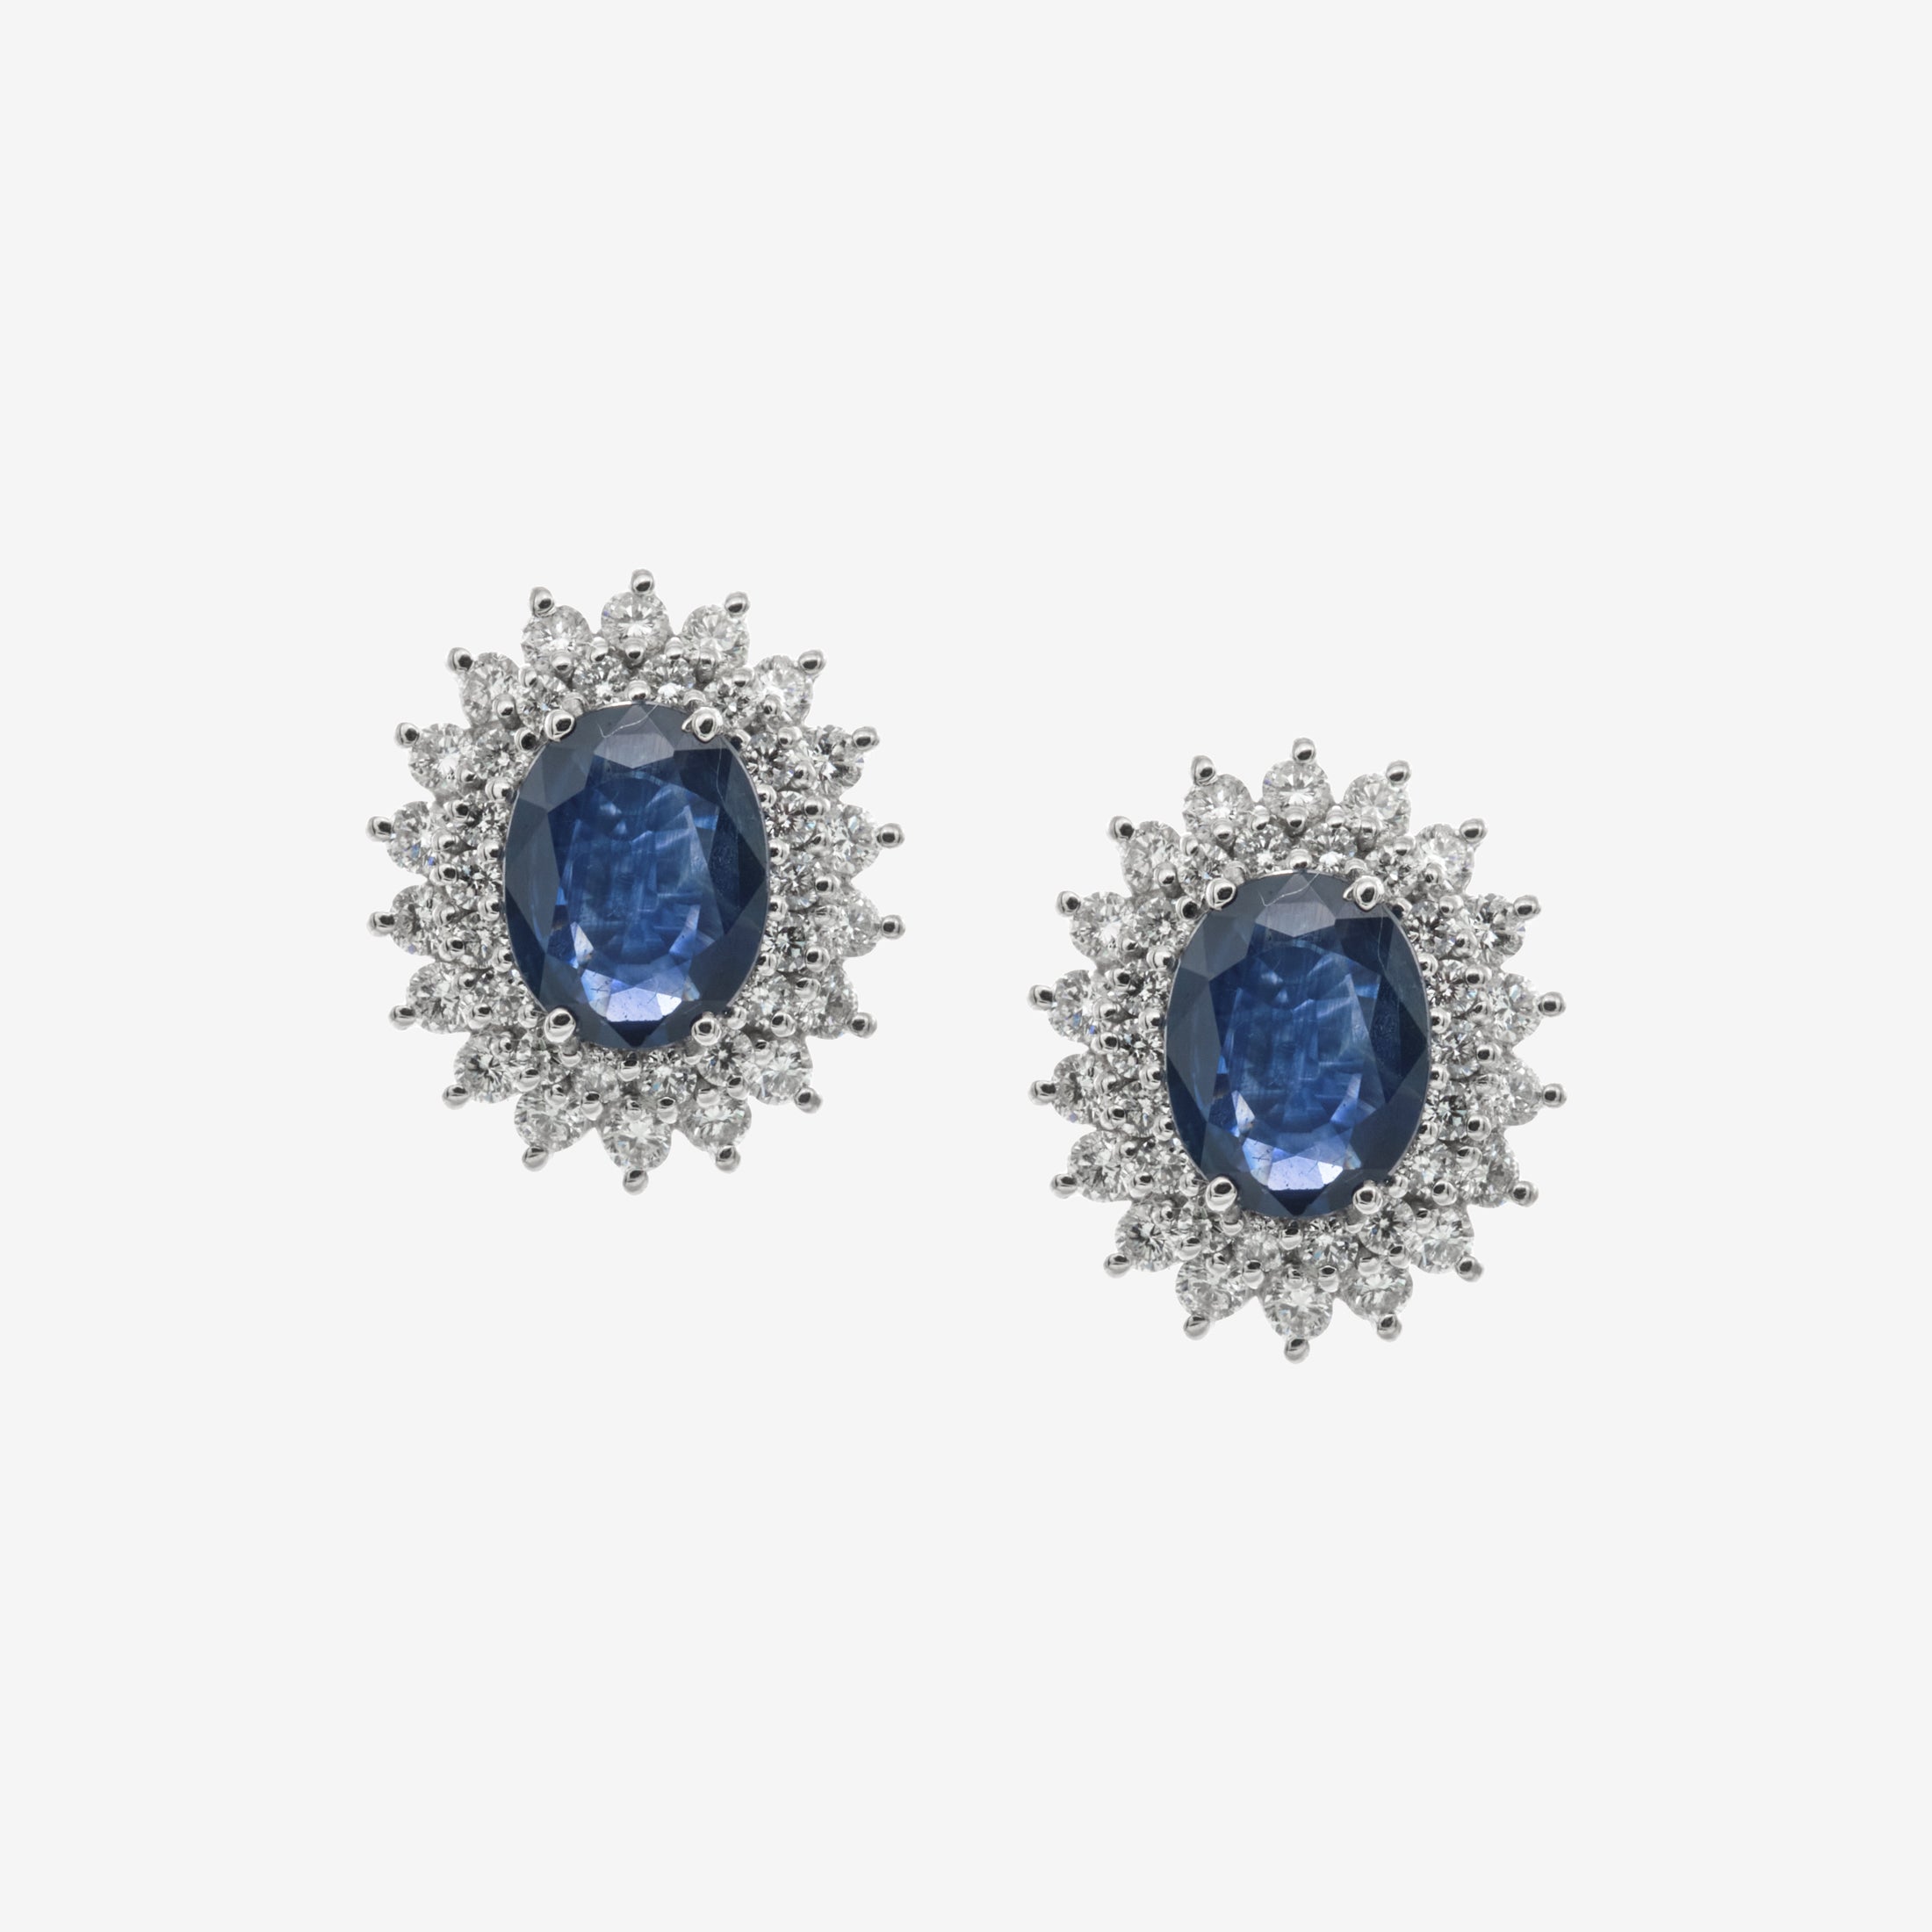 Odessa earrings with sapphires and diamonds